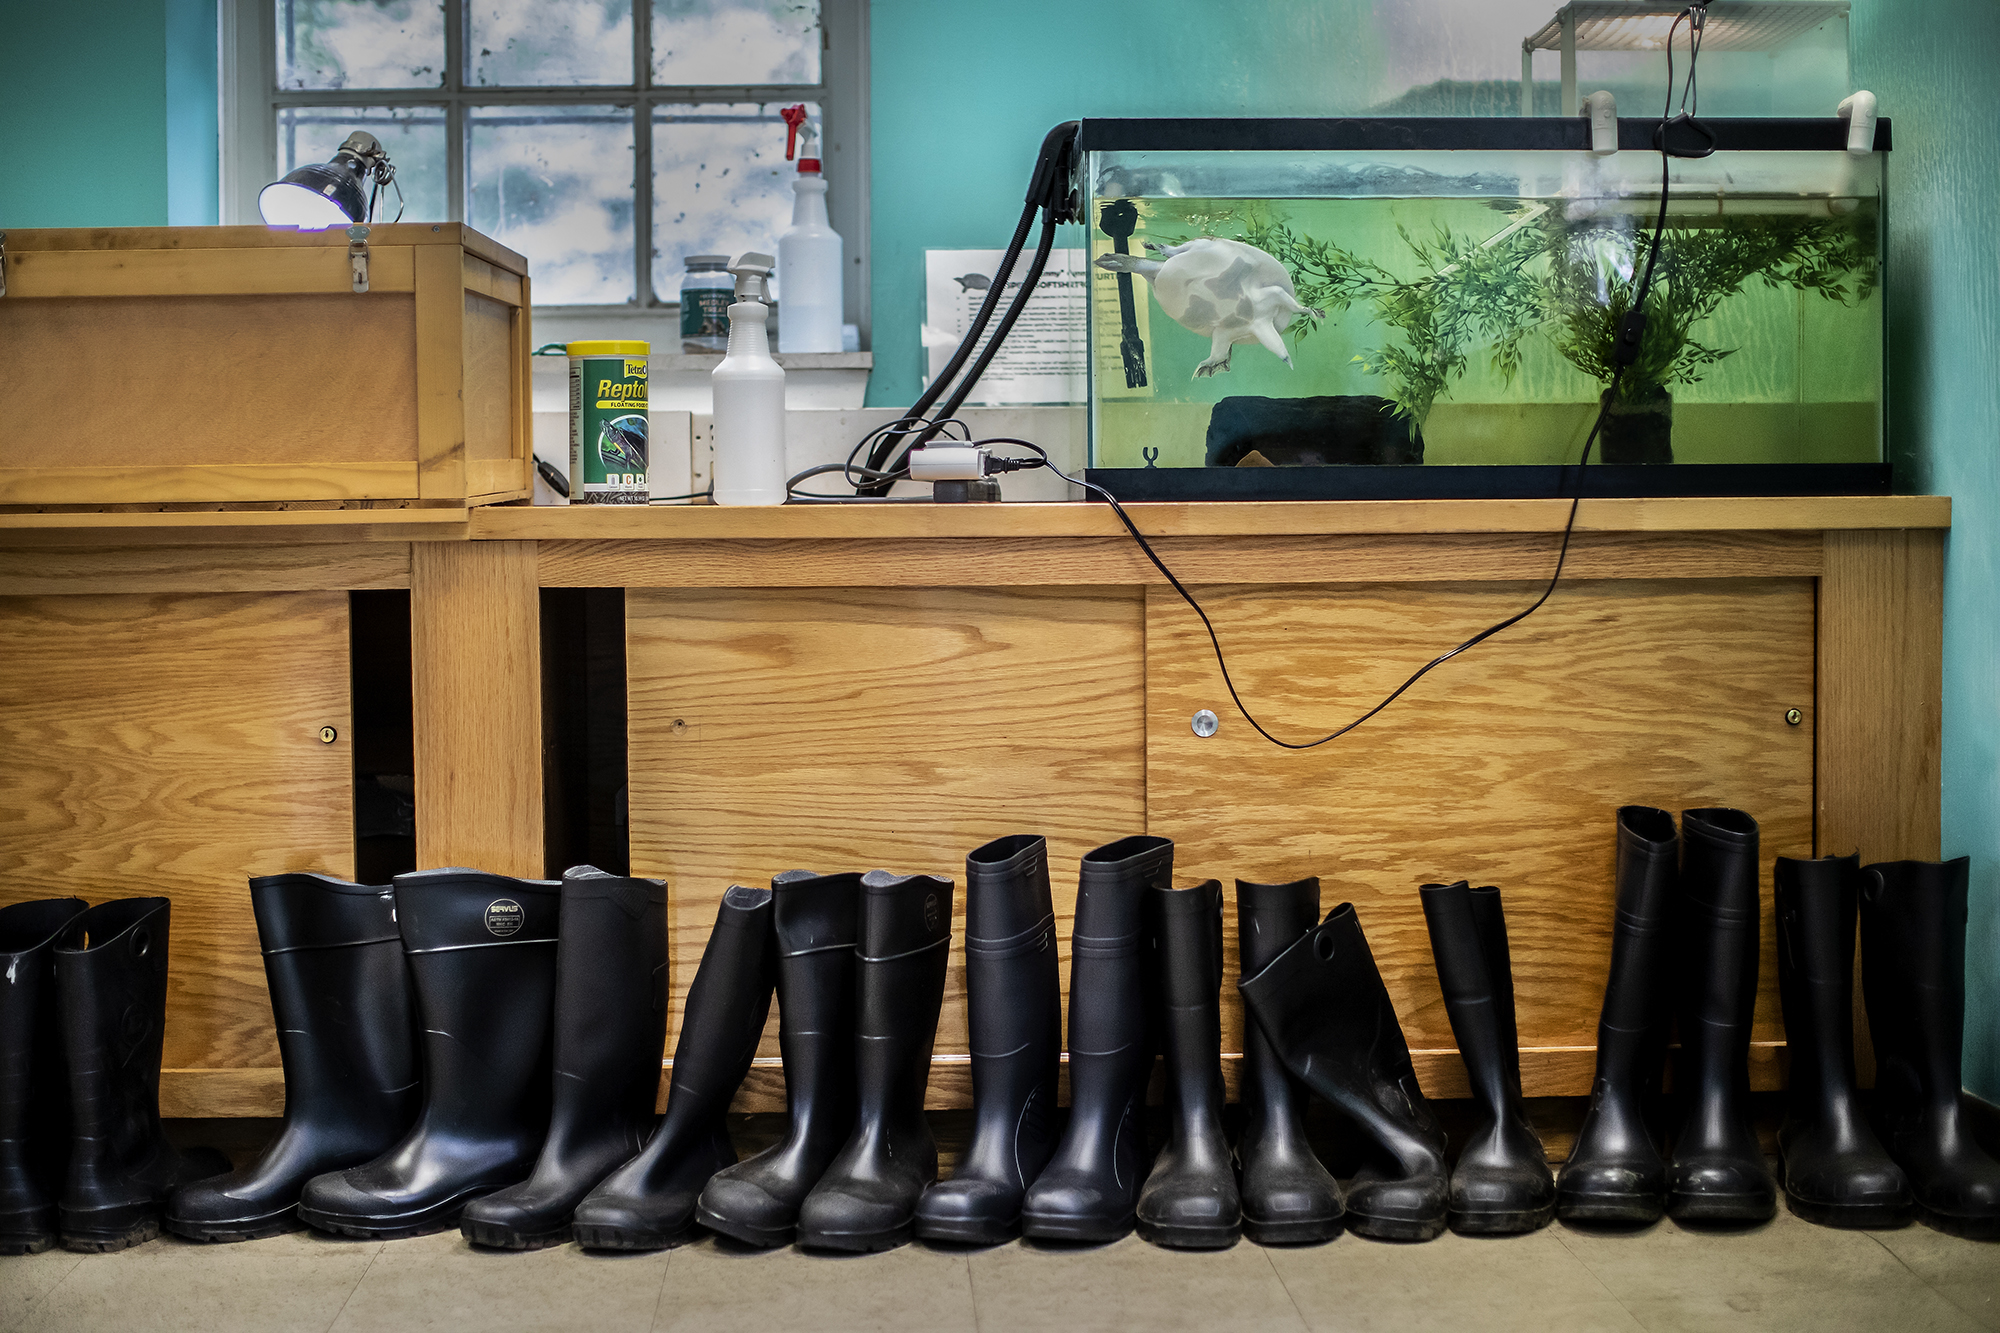 A row of black rain boots on the floor in front of a fish tank.